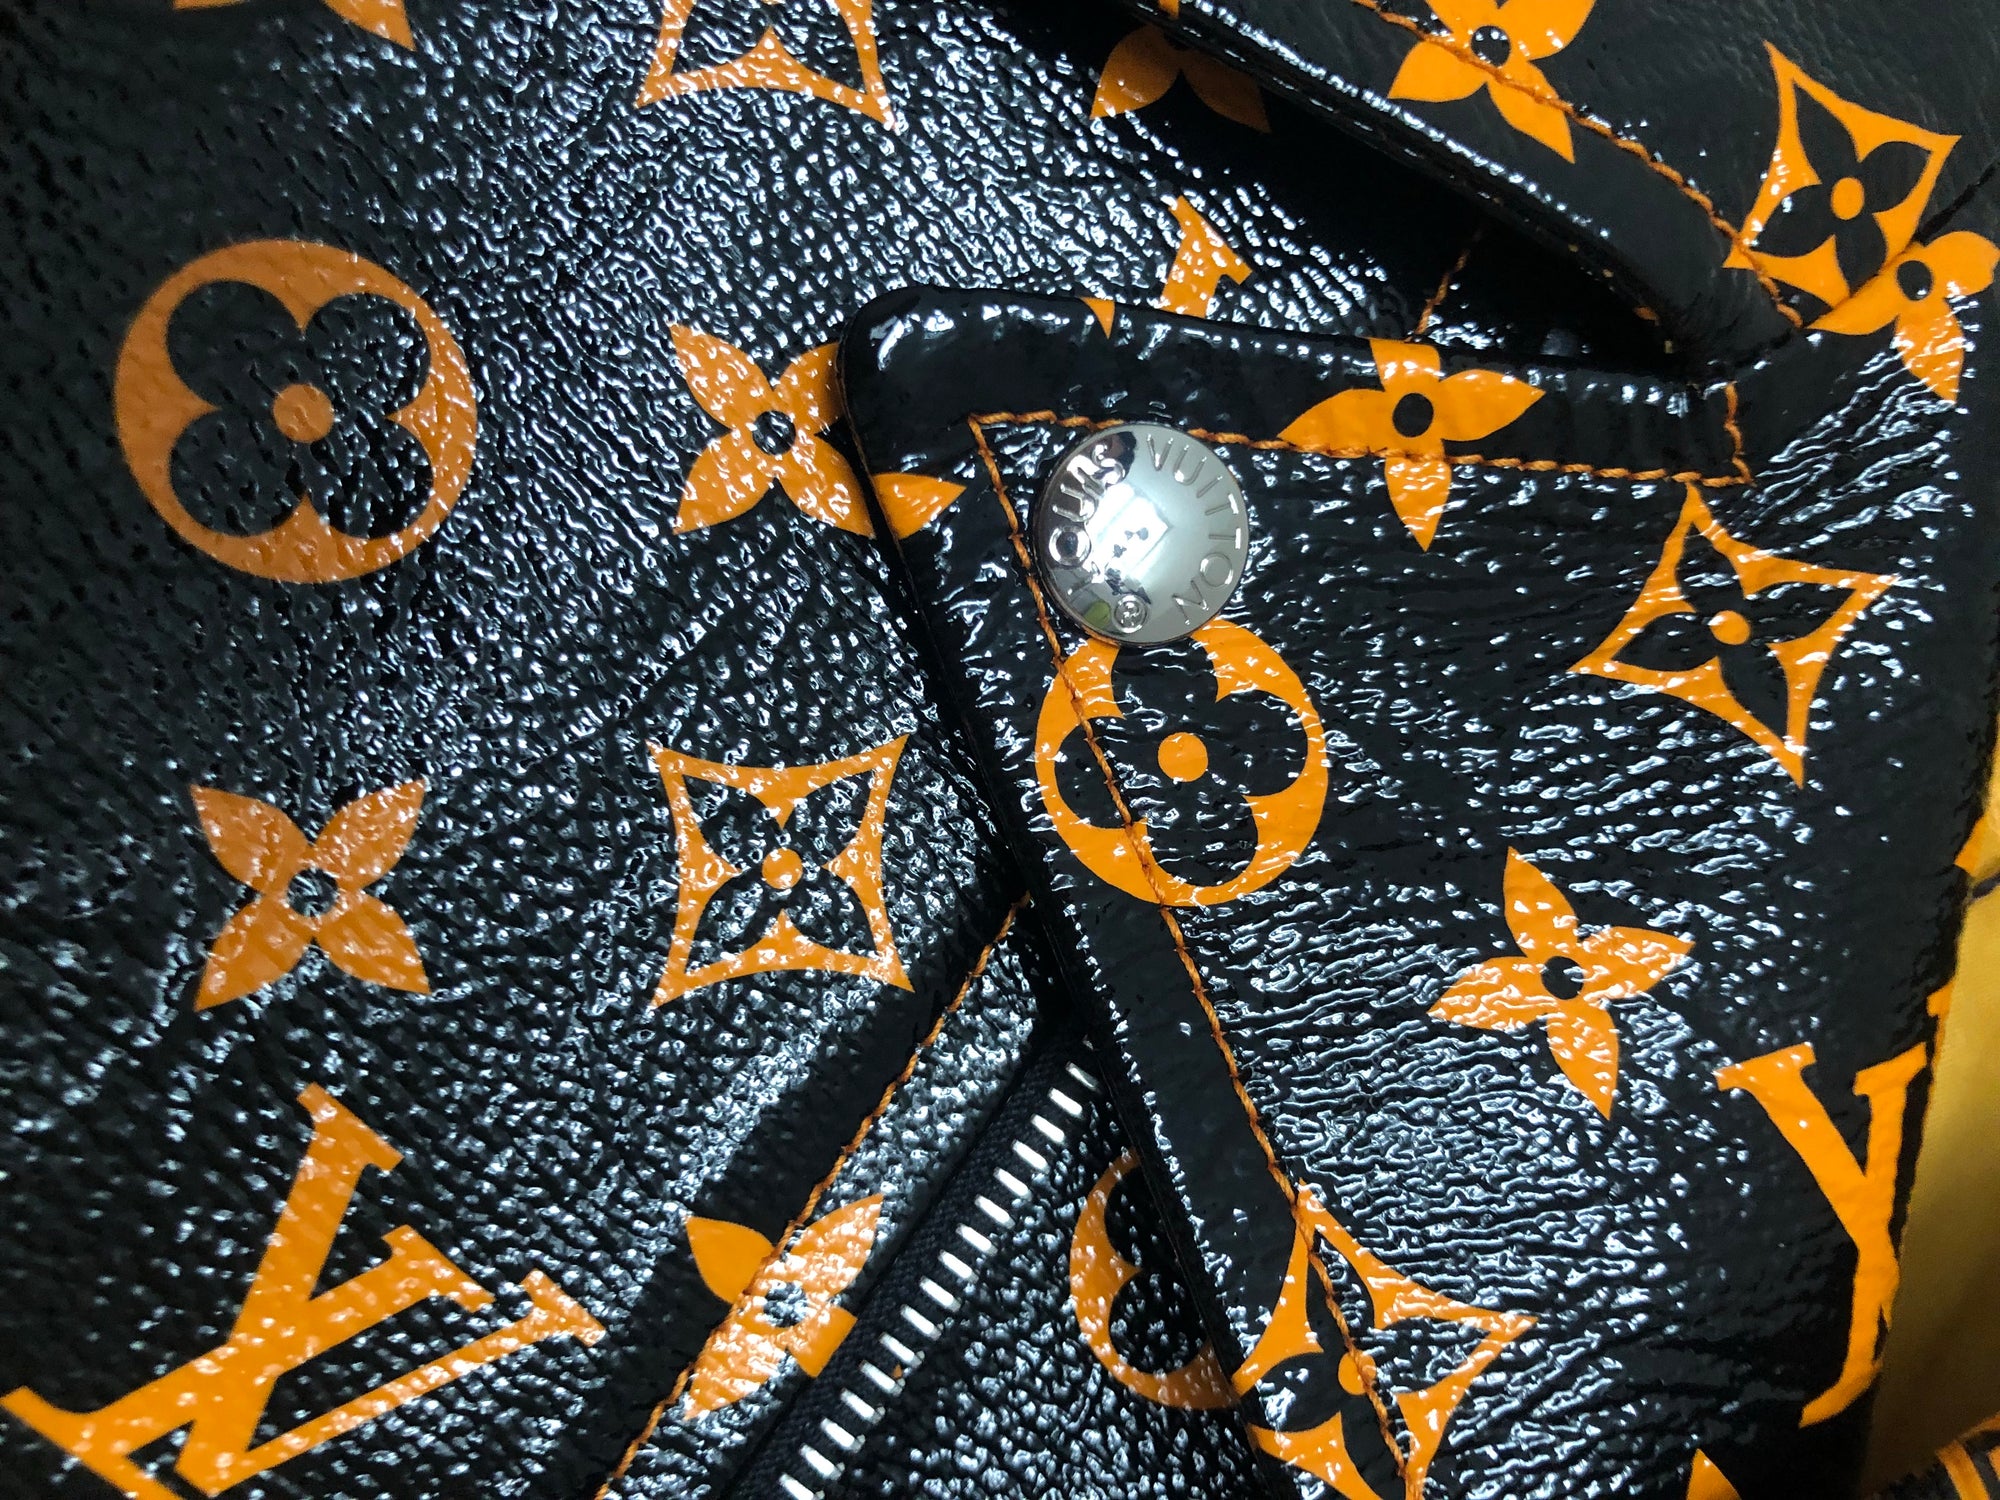 vuitton leather